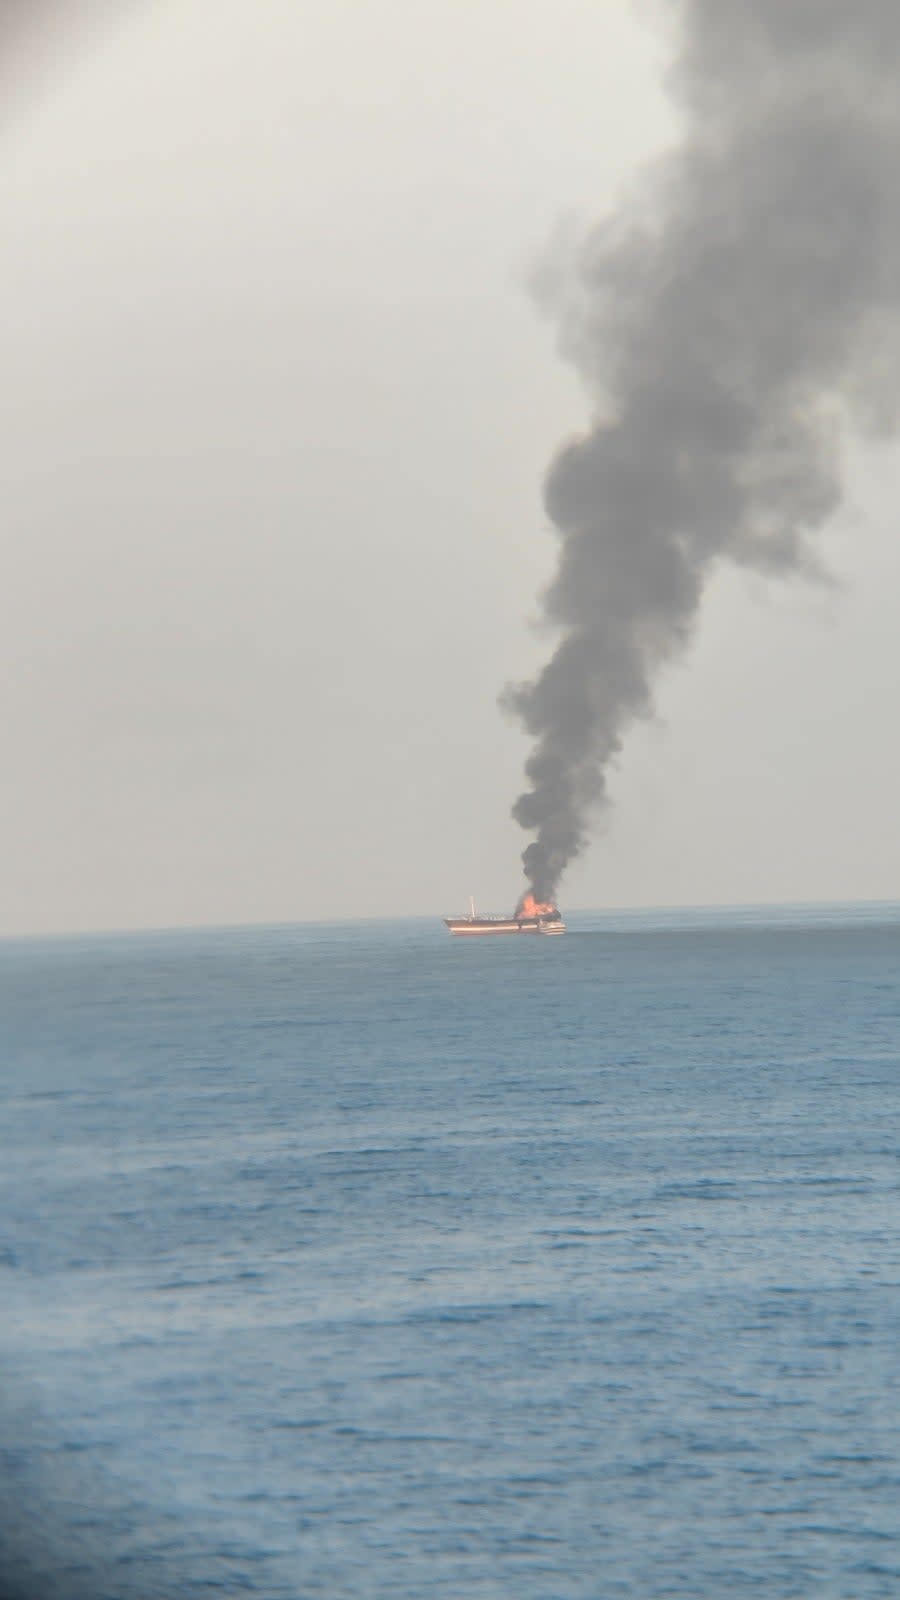 The <em>CMA CGM Symi</em> cargo vessel burning in the Indian Ocean after a suspected Houthi drone attack. (Ambrey photo)